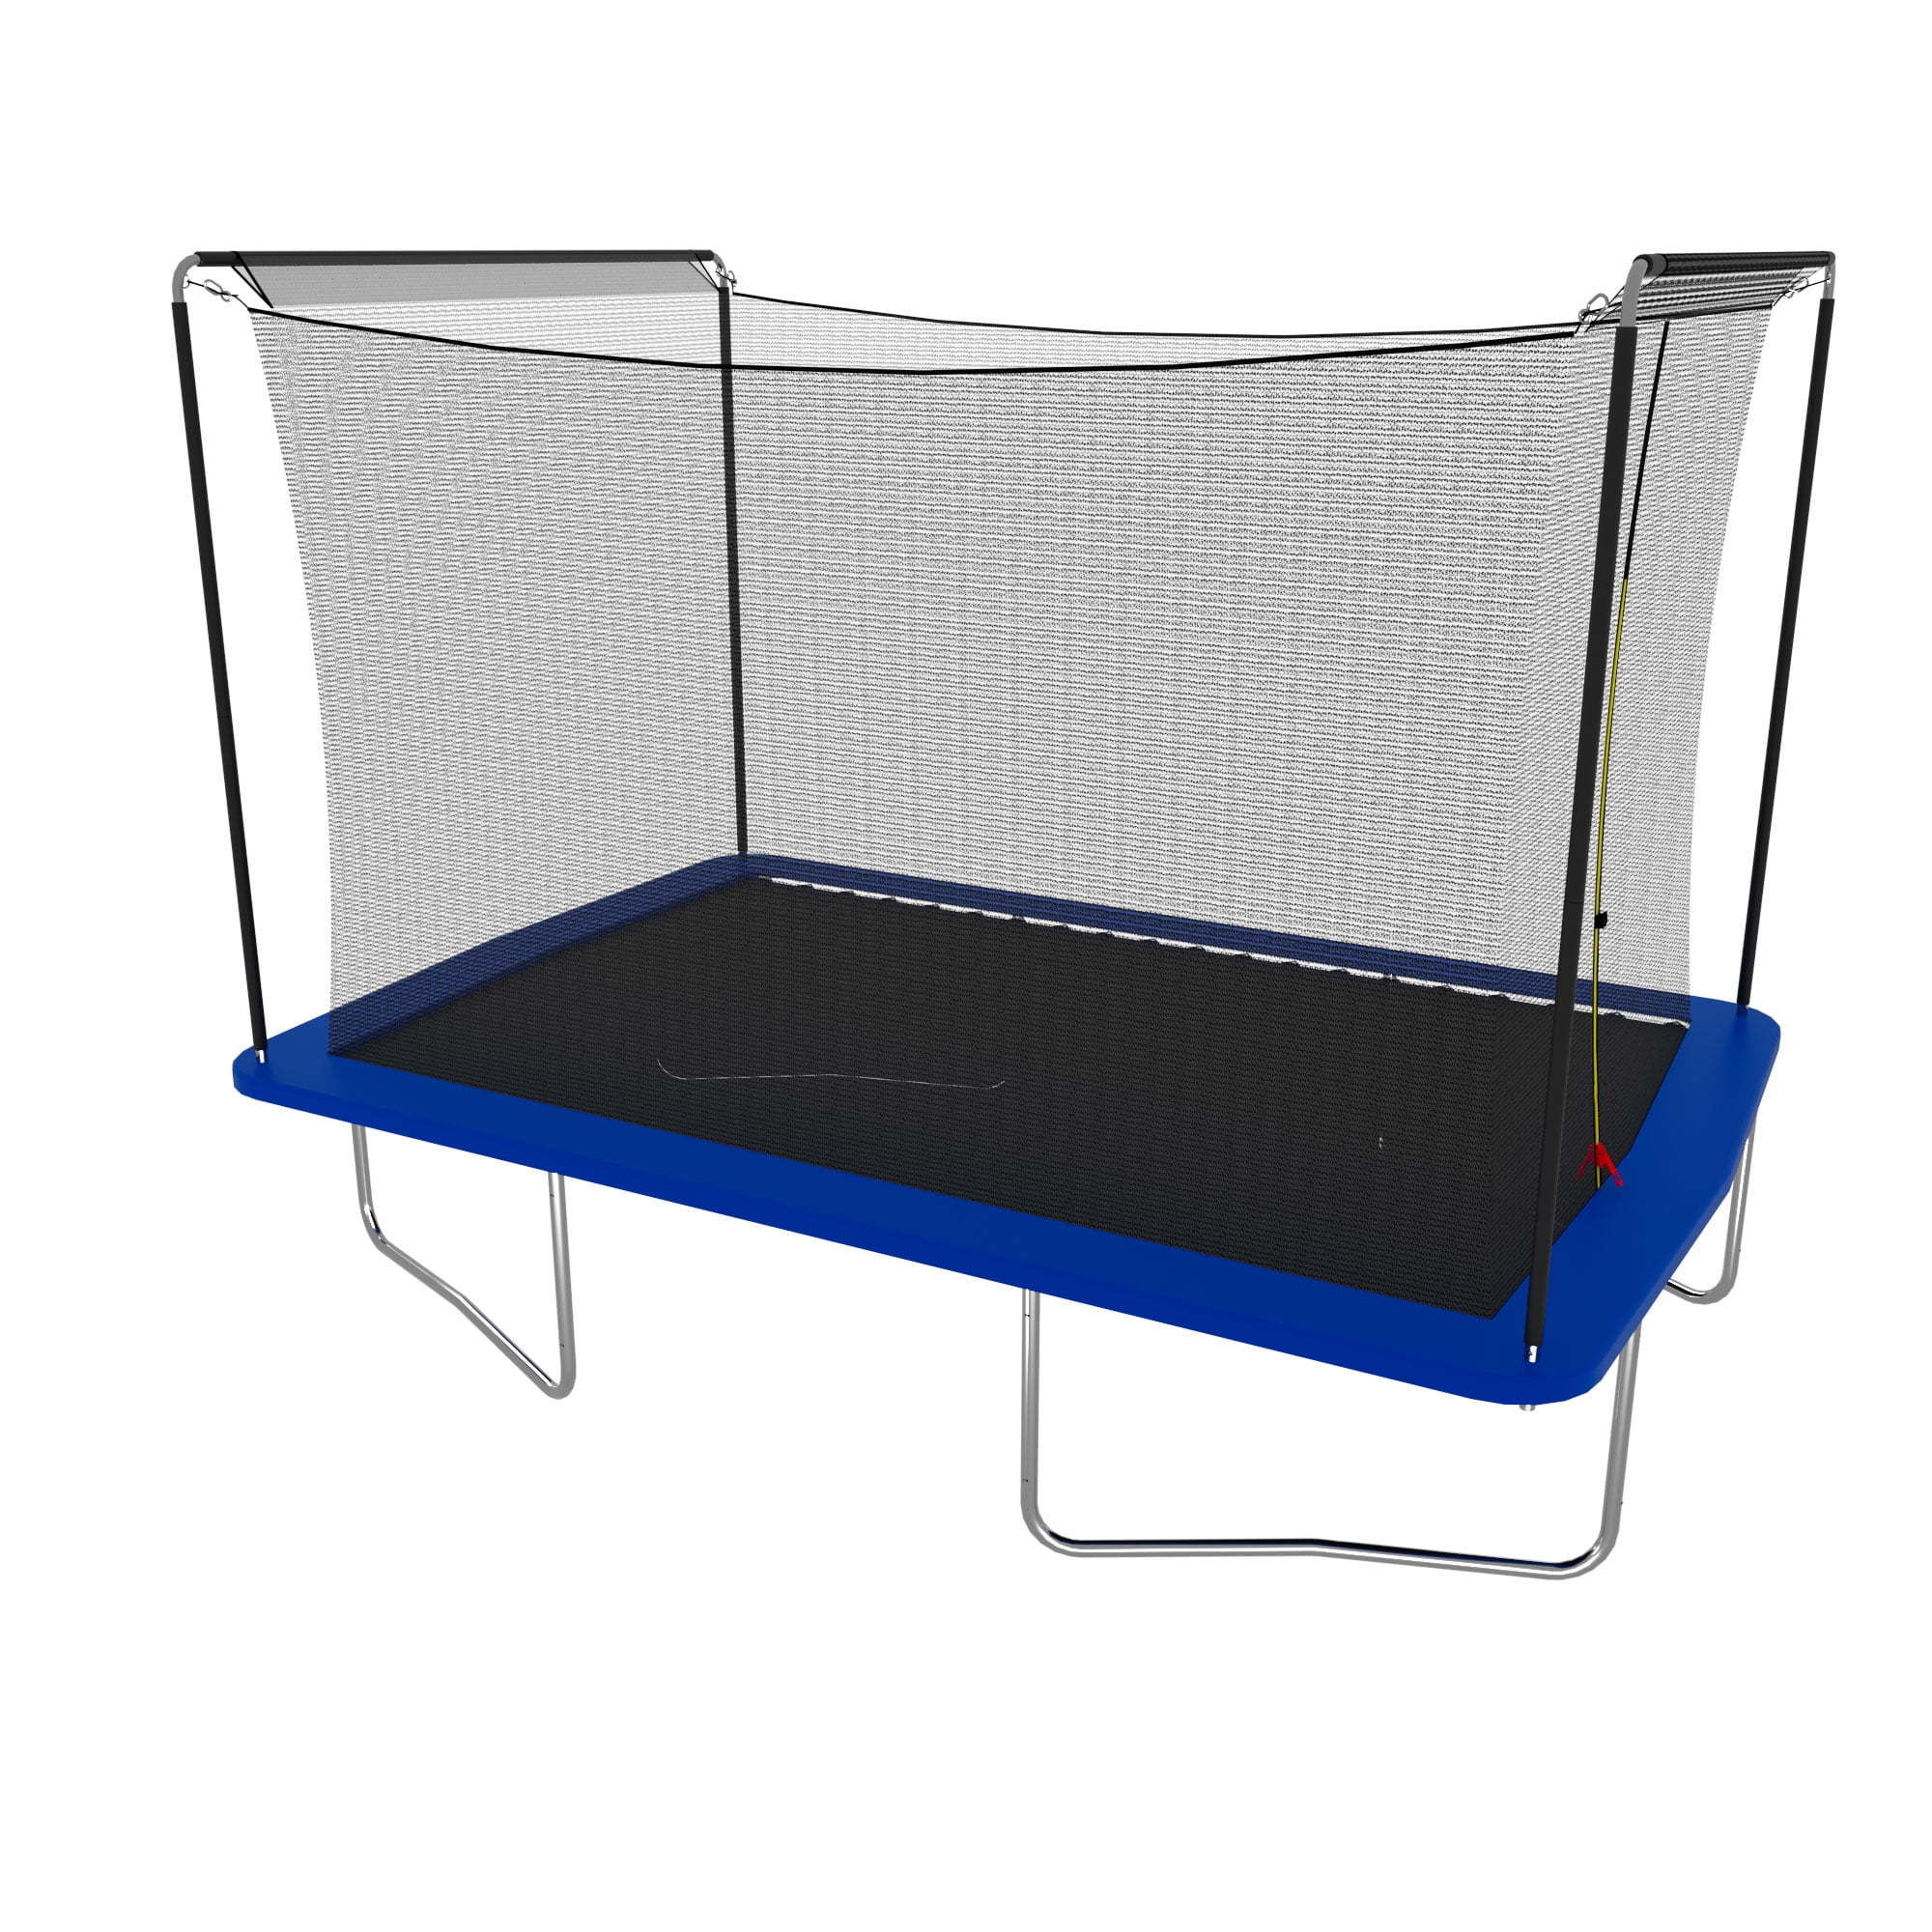 Gurgle Spild internettet 8Ft x 12Ft Kids Trampoline, Square Bouncer Trampolines with Heavy Duty  Steel Tubes and Safety Enclosure Net, Exercise Trampoline Playing Equipment  with 4 U-shaped Legs for Outdoor Indoor, Blue - Walmart.com